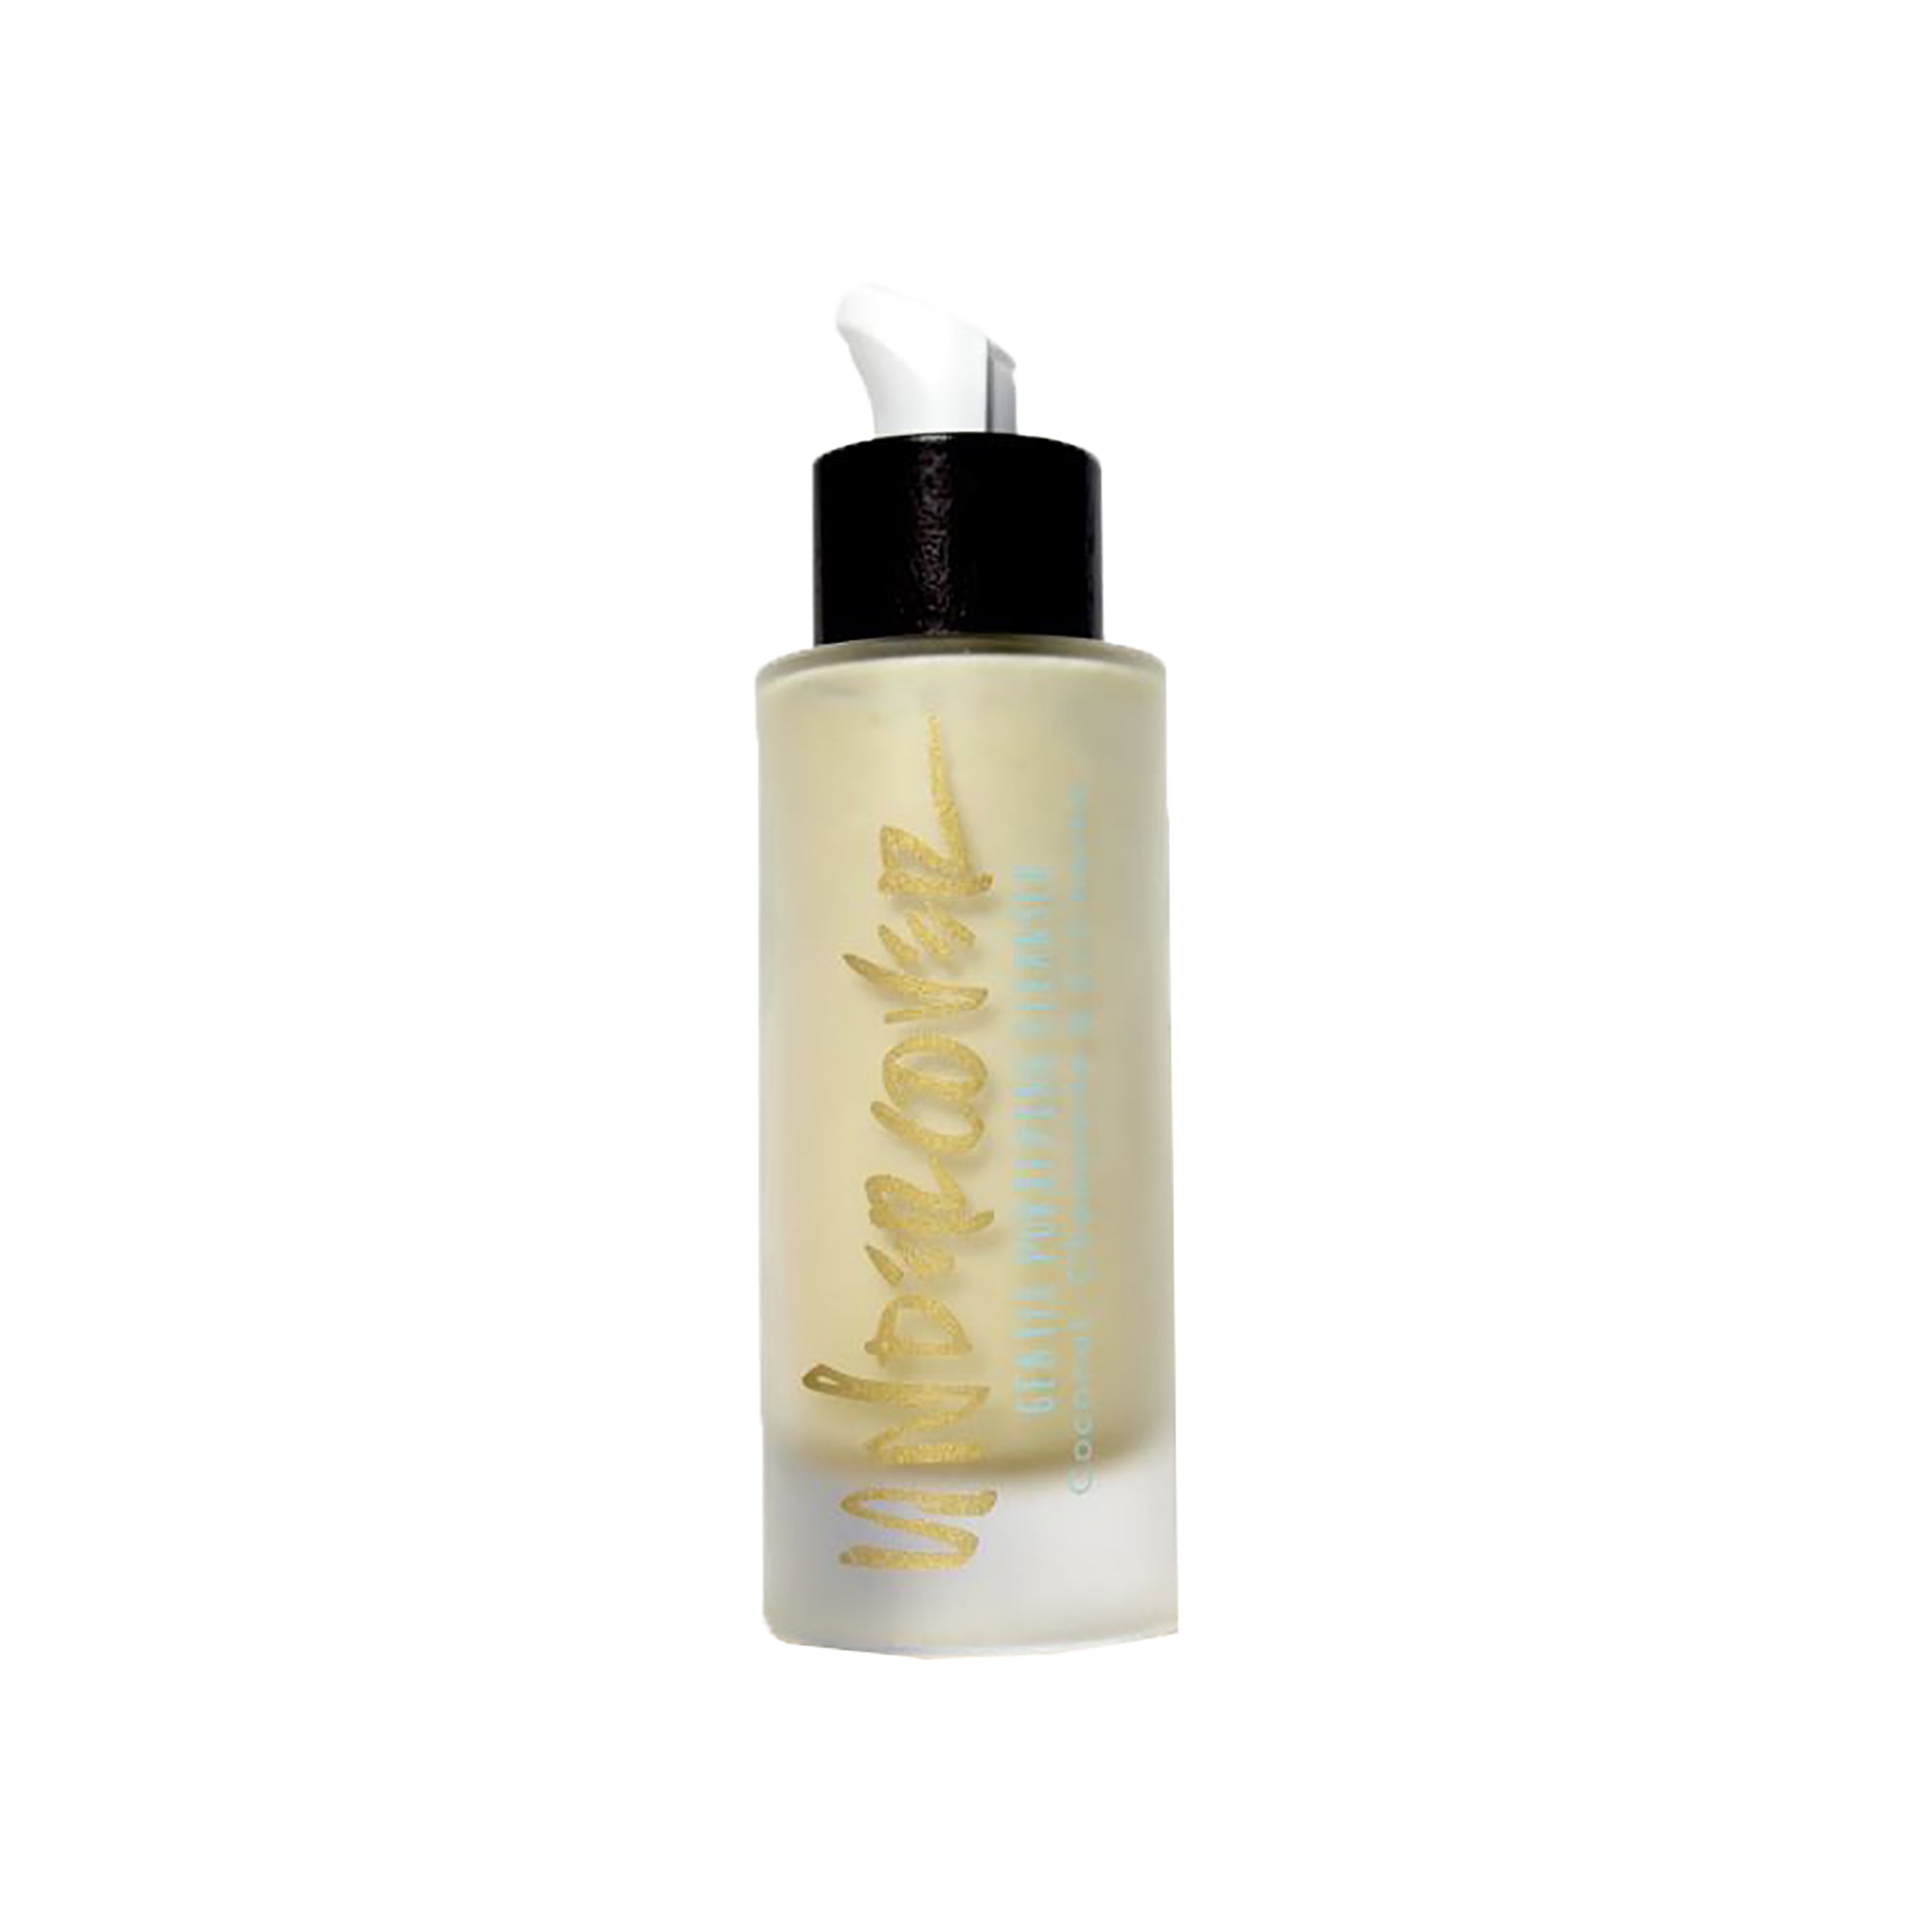 Undercover Dreams Gentle Purifying Cleanser / 3.4 oz